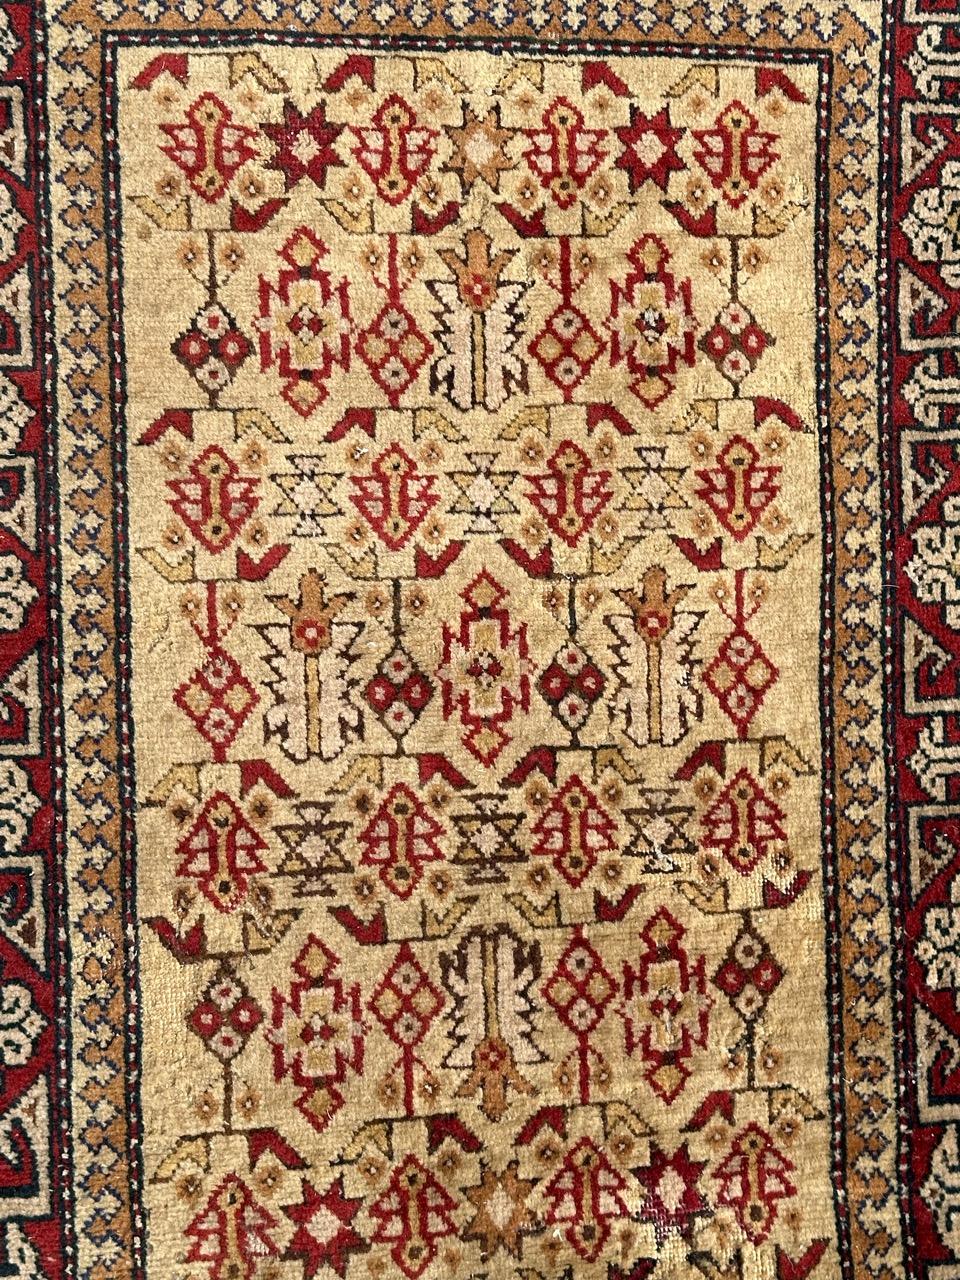 Nice mid century Azerbaïdjan rug with beautiful design of Caucasian shirvan rugs and nice colors, entirely hand knotted with wool velvet on cotton foundation.

✨✨✨
